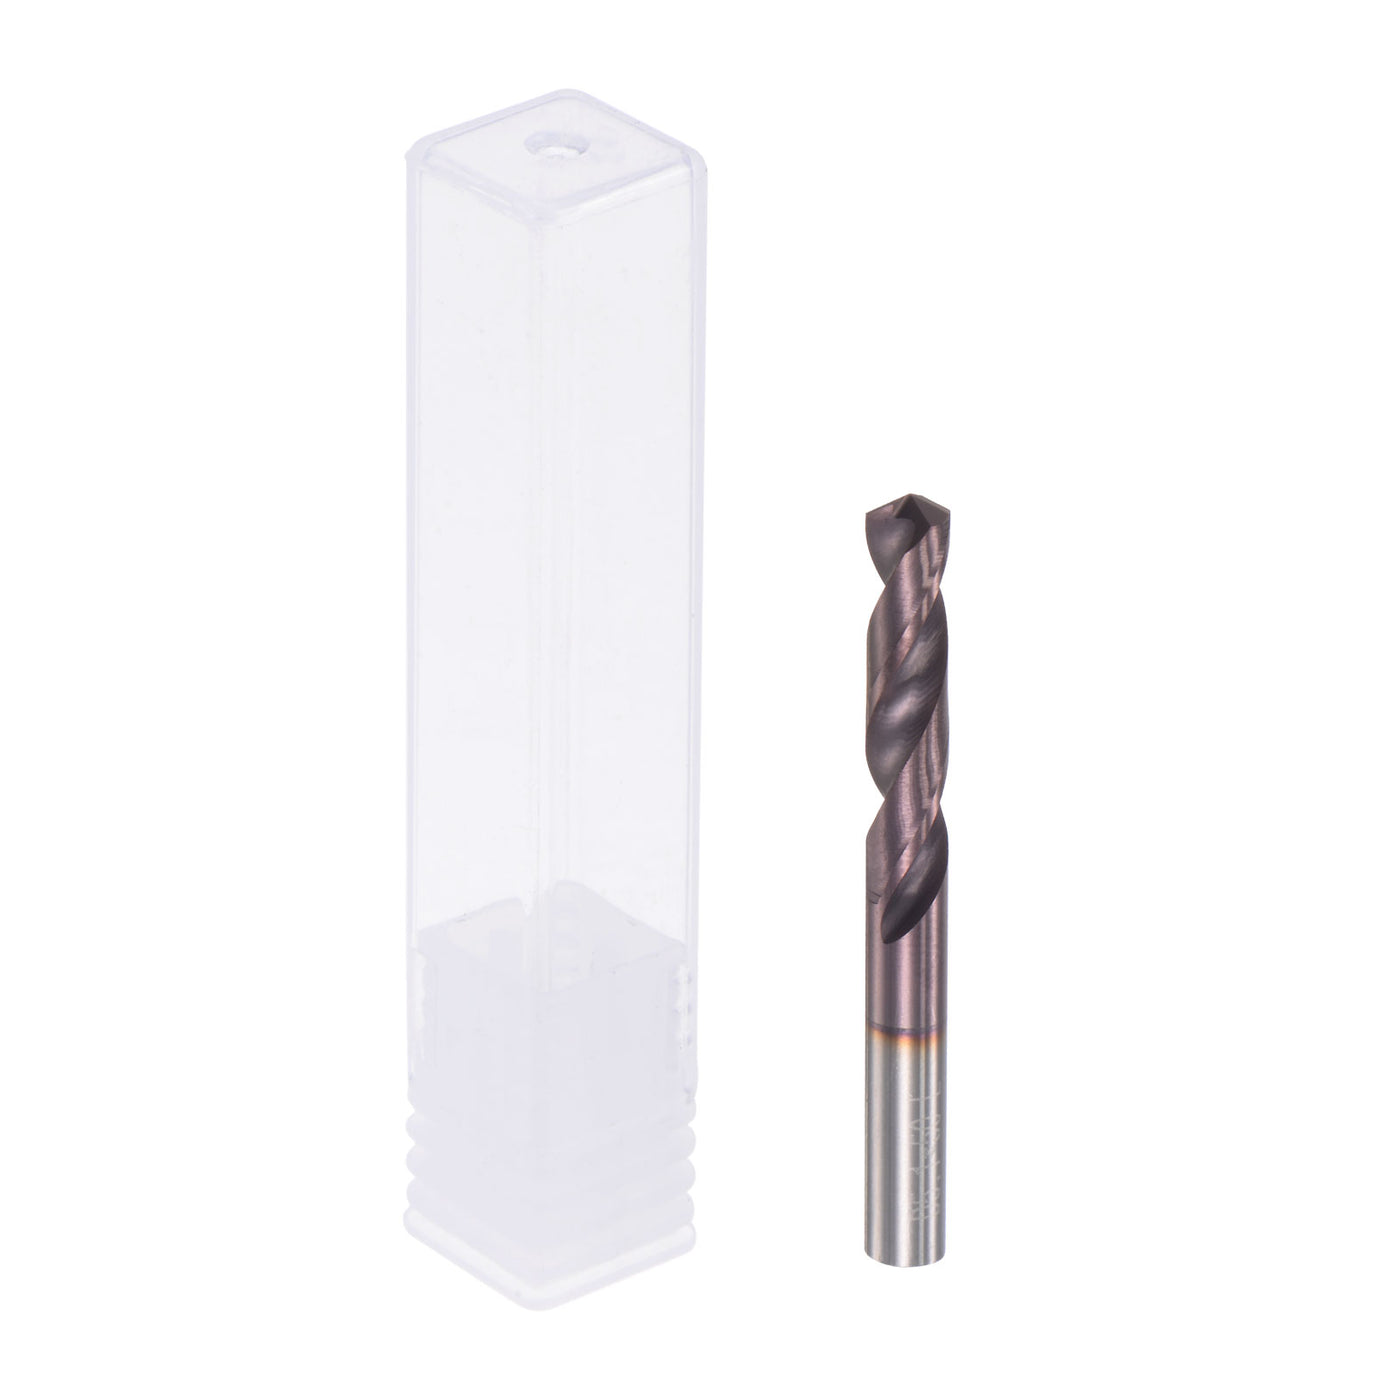 uxcell Uxcell 5.1mm DIN K45 Tungsten Carbide AlTiSin Coated Drill Bit for Stainless Steel